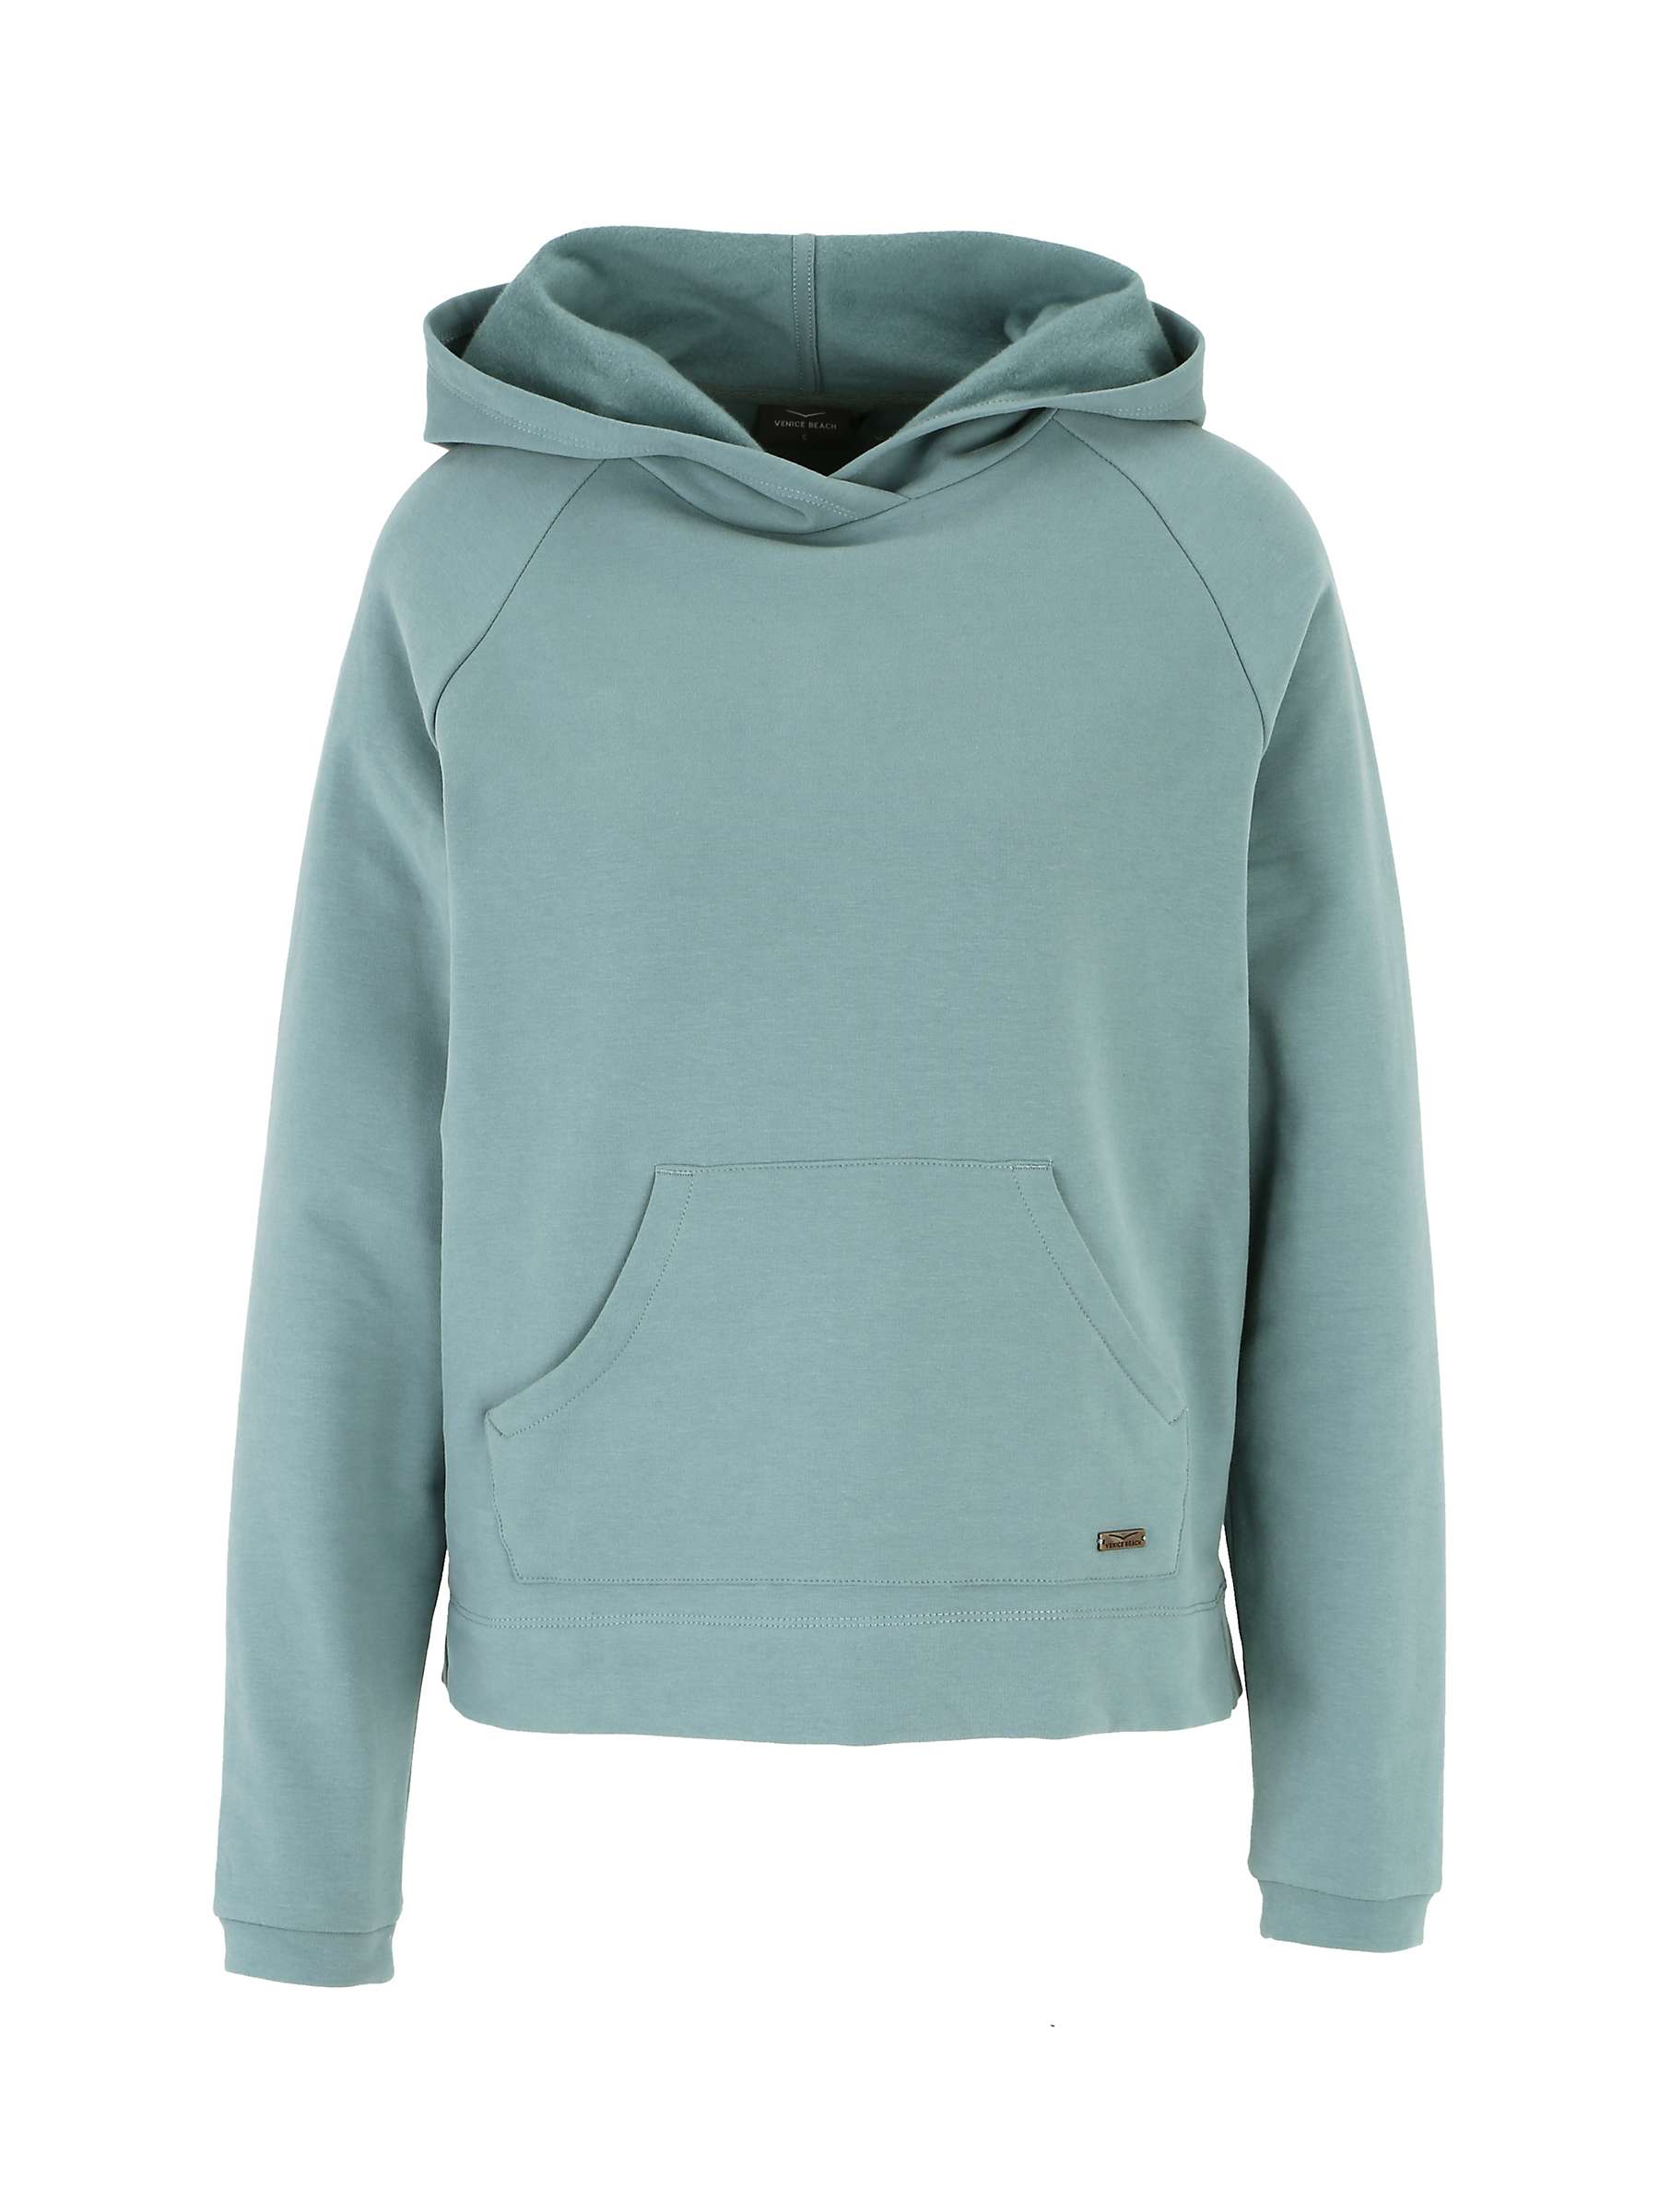 Buy Venice Beach Liyana Cotton Blend Hoodie, Agave Online at johnlewis.com